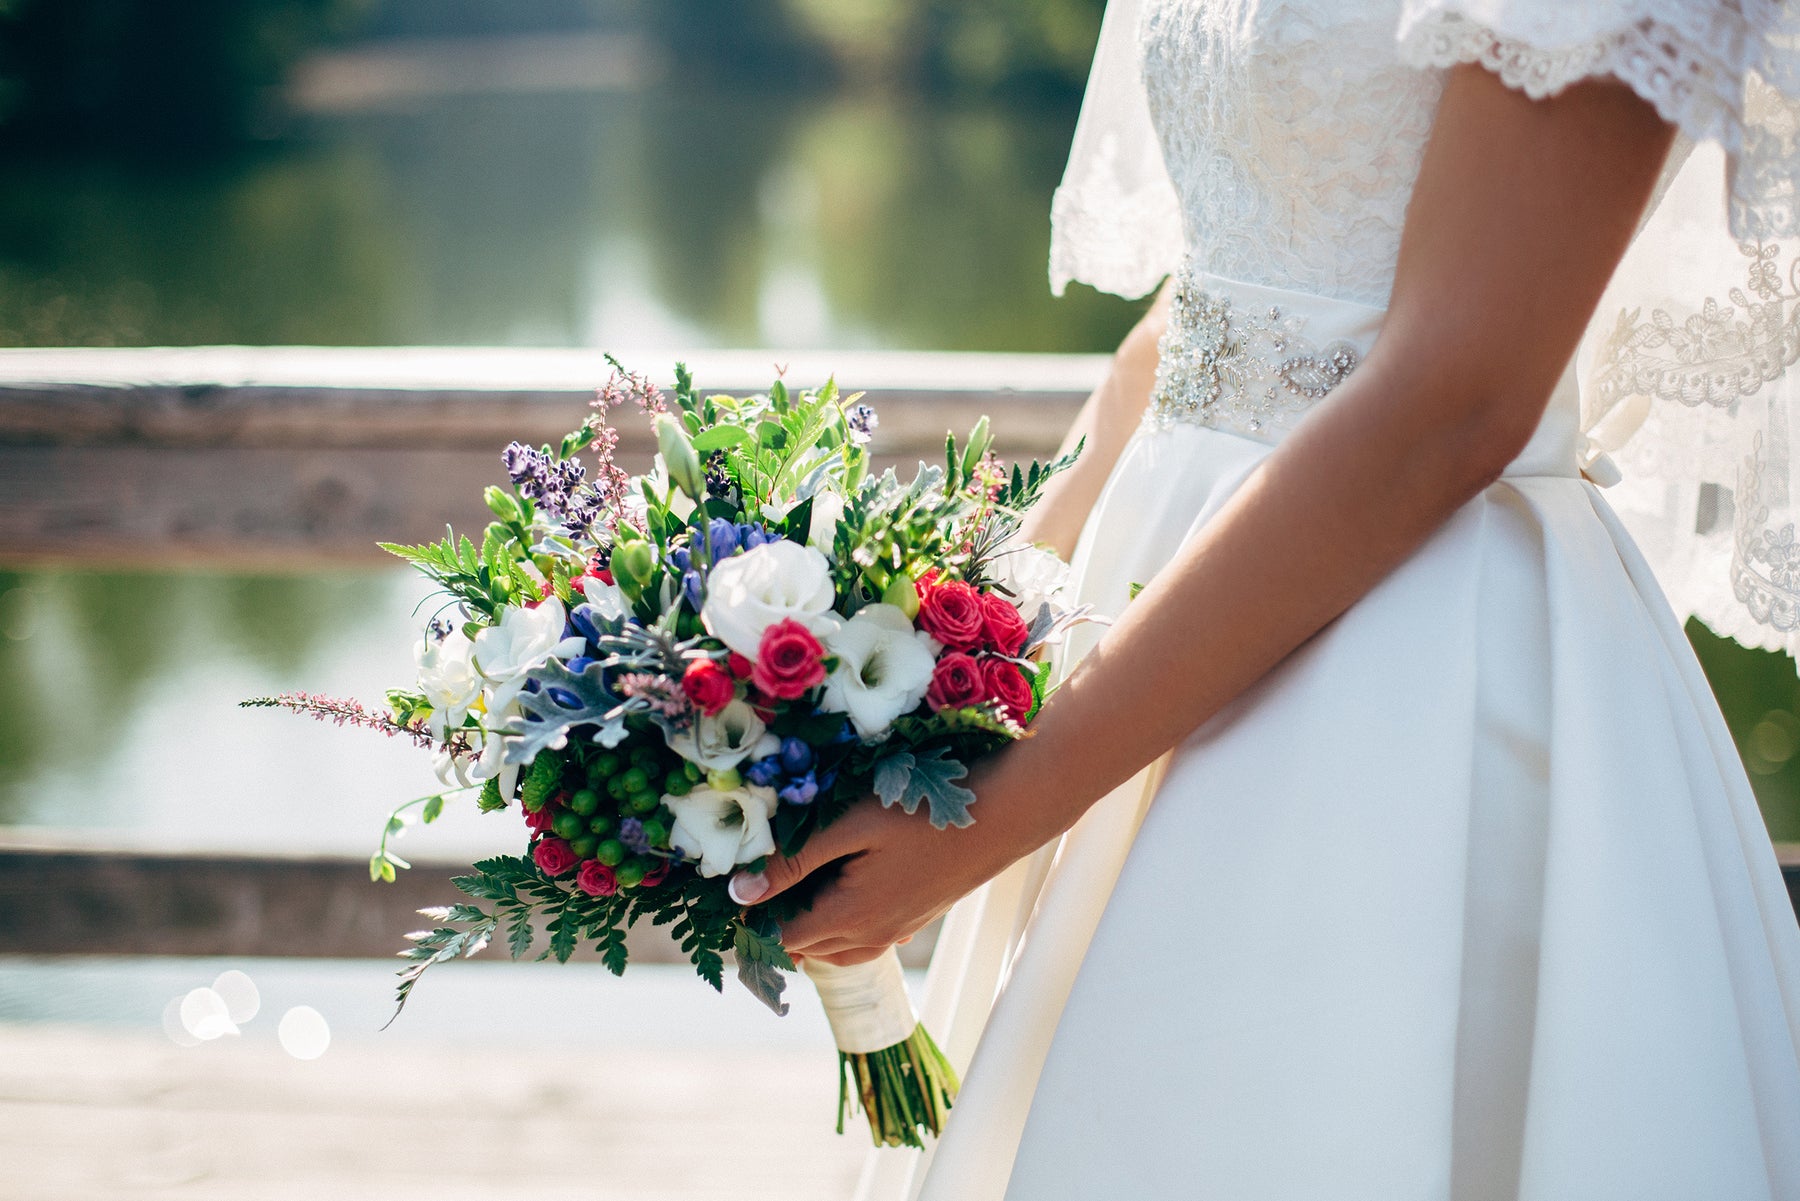 Recommended Spring Wedding Flowers and Bouquets | SilksAreForever.com